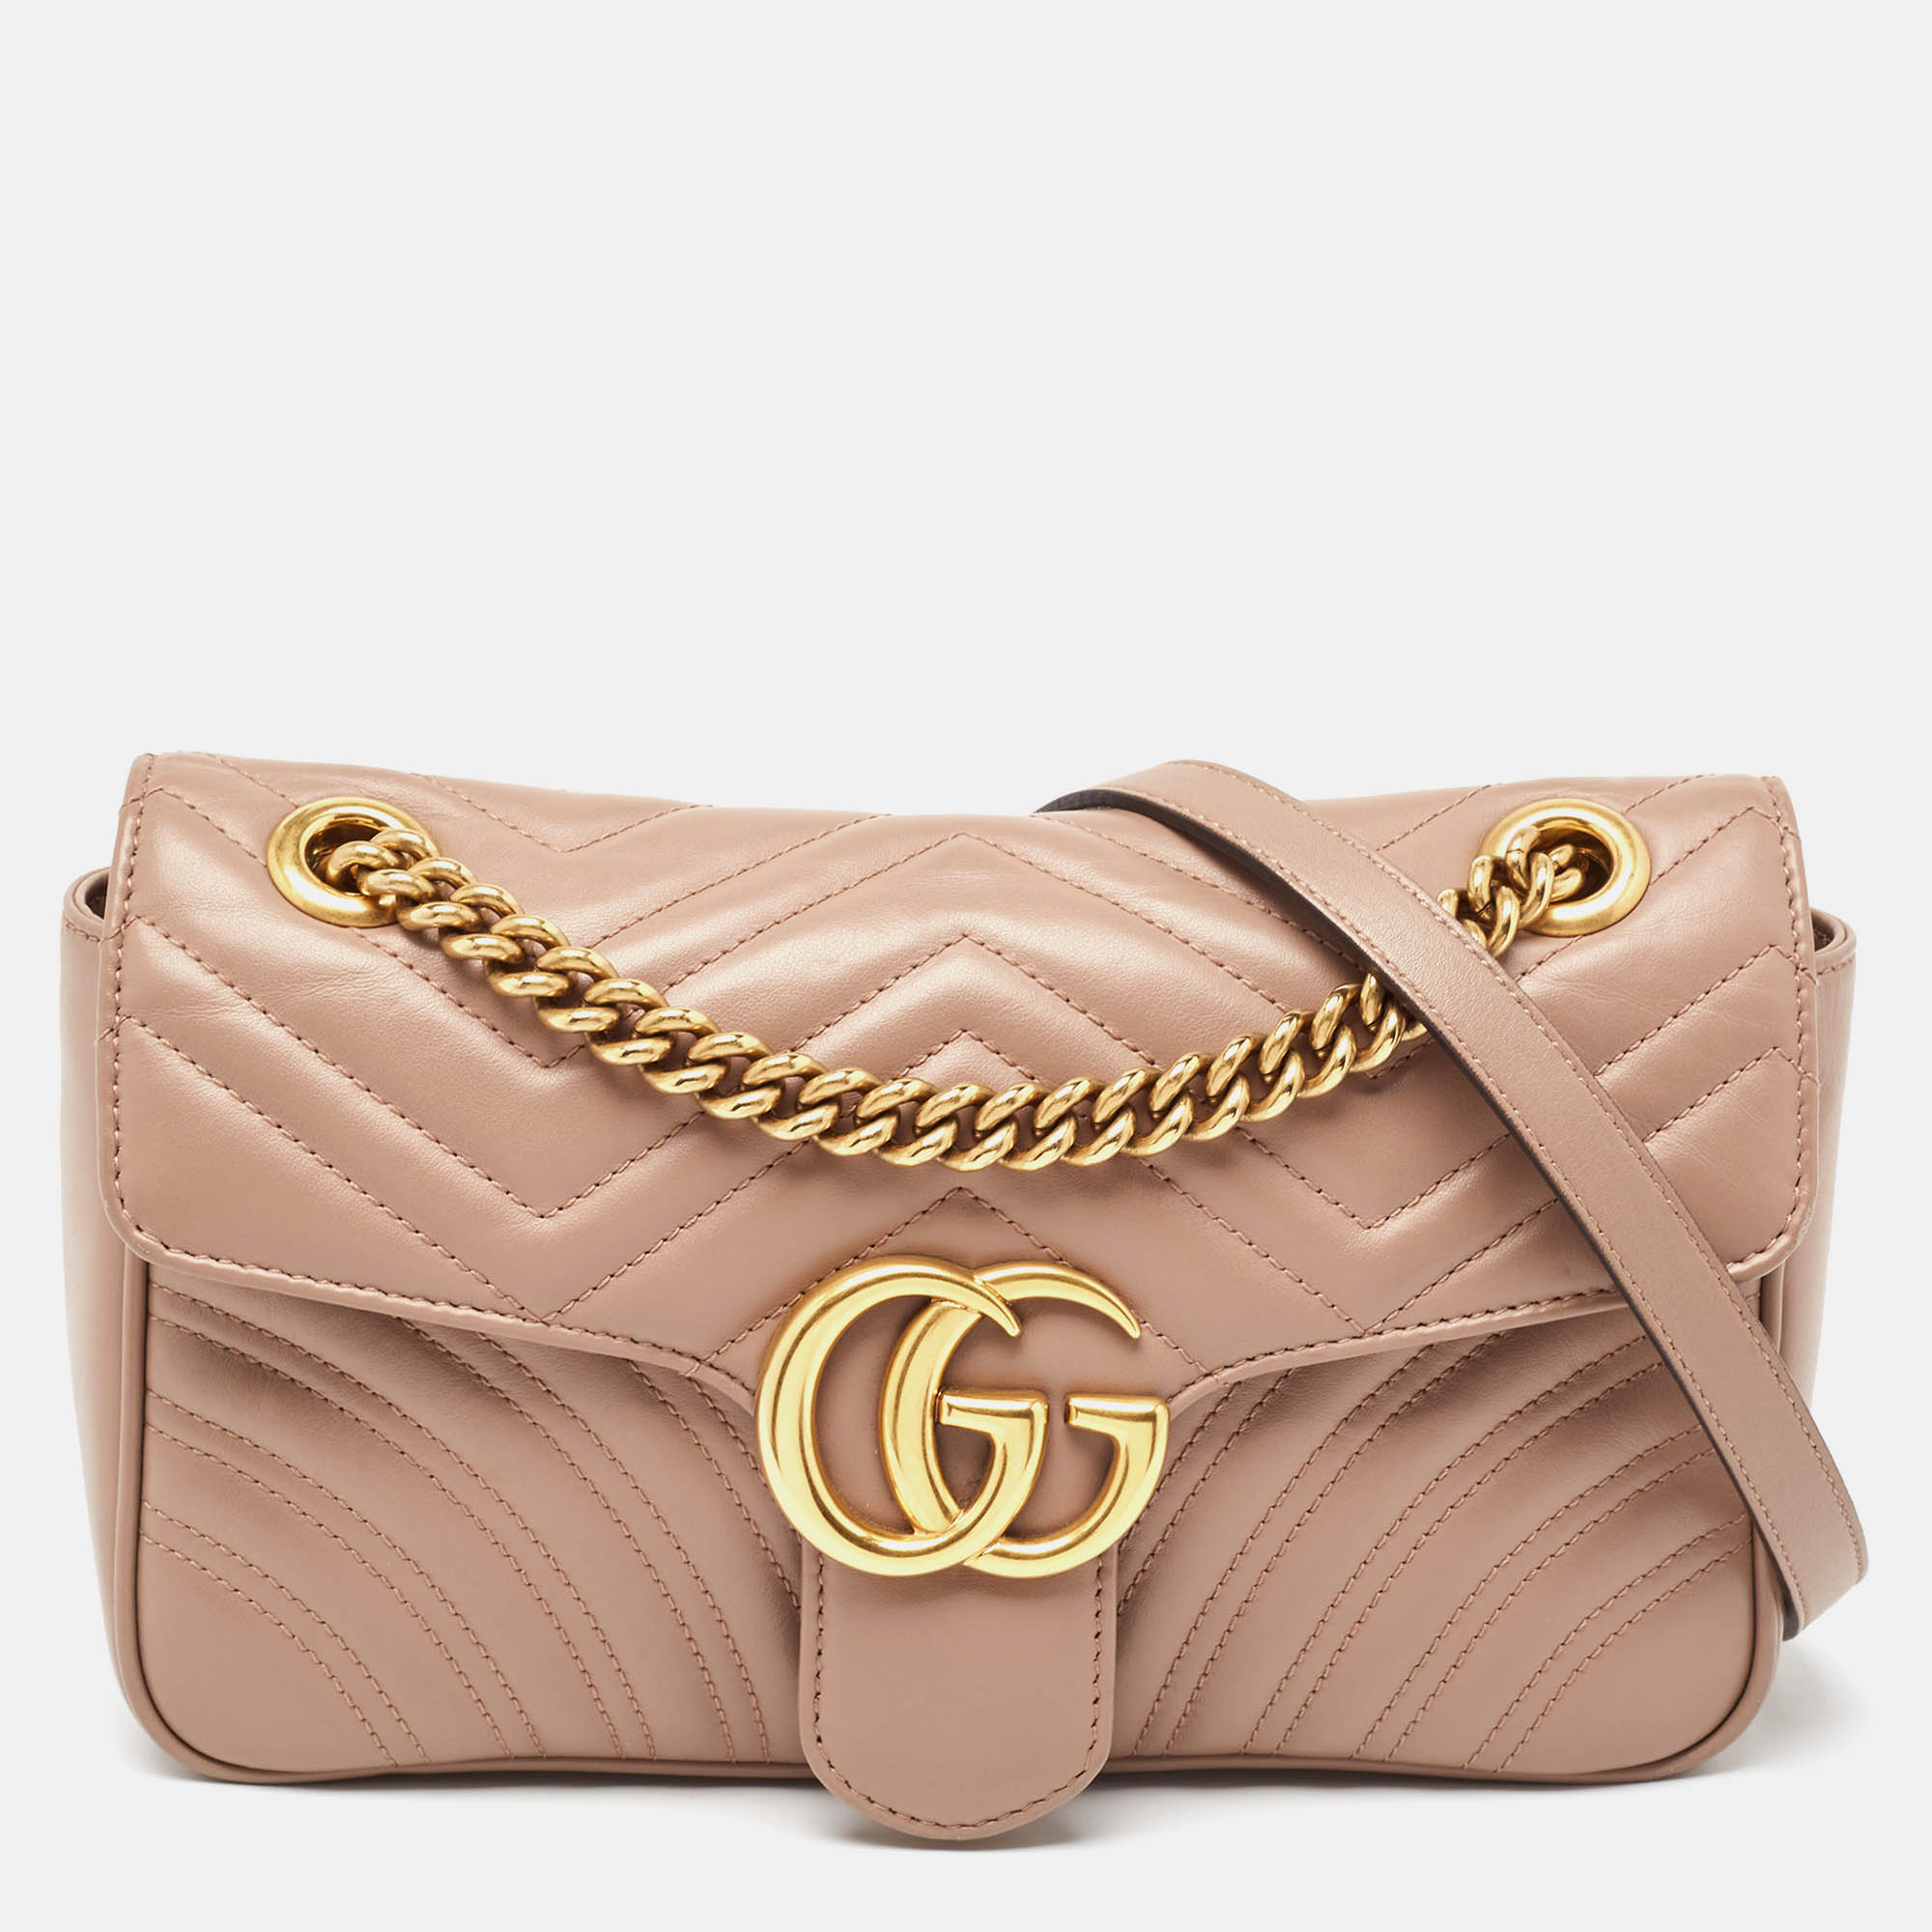 Gucci beige matelasse leather small gg marmont shoulder bag